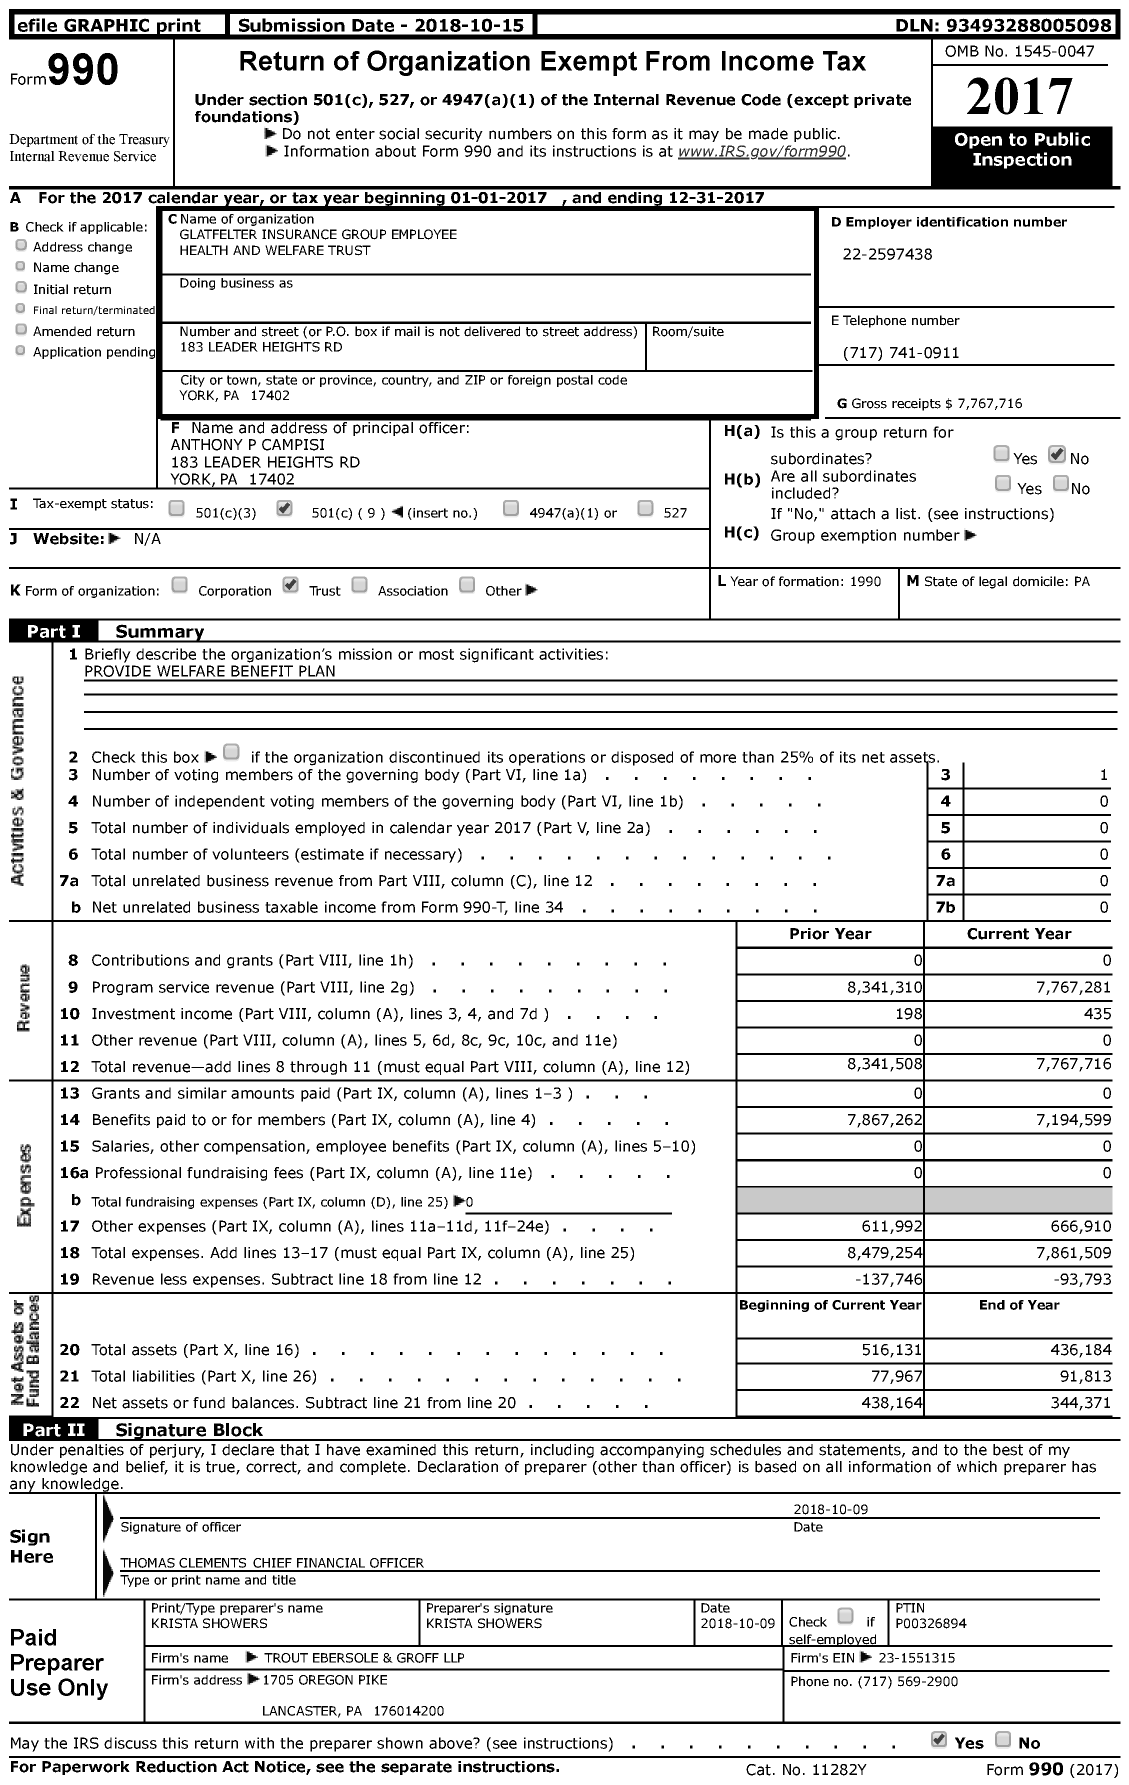 Image of first page of 2017 Form 990 for Glatfelter Insurance Group Employee Health and Welfare Trust